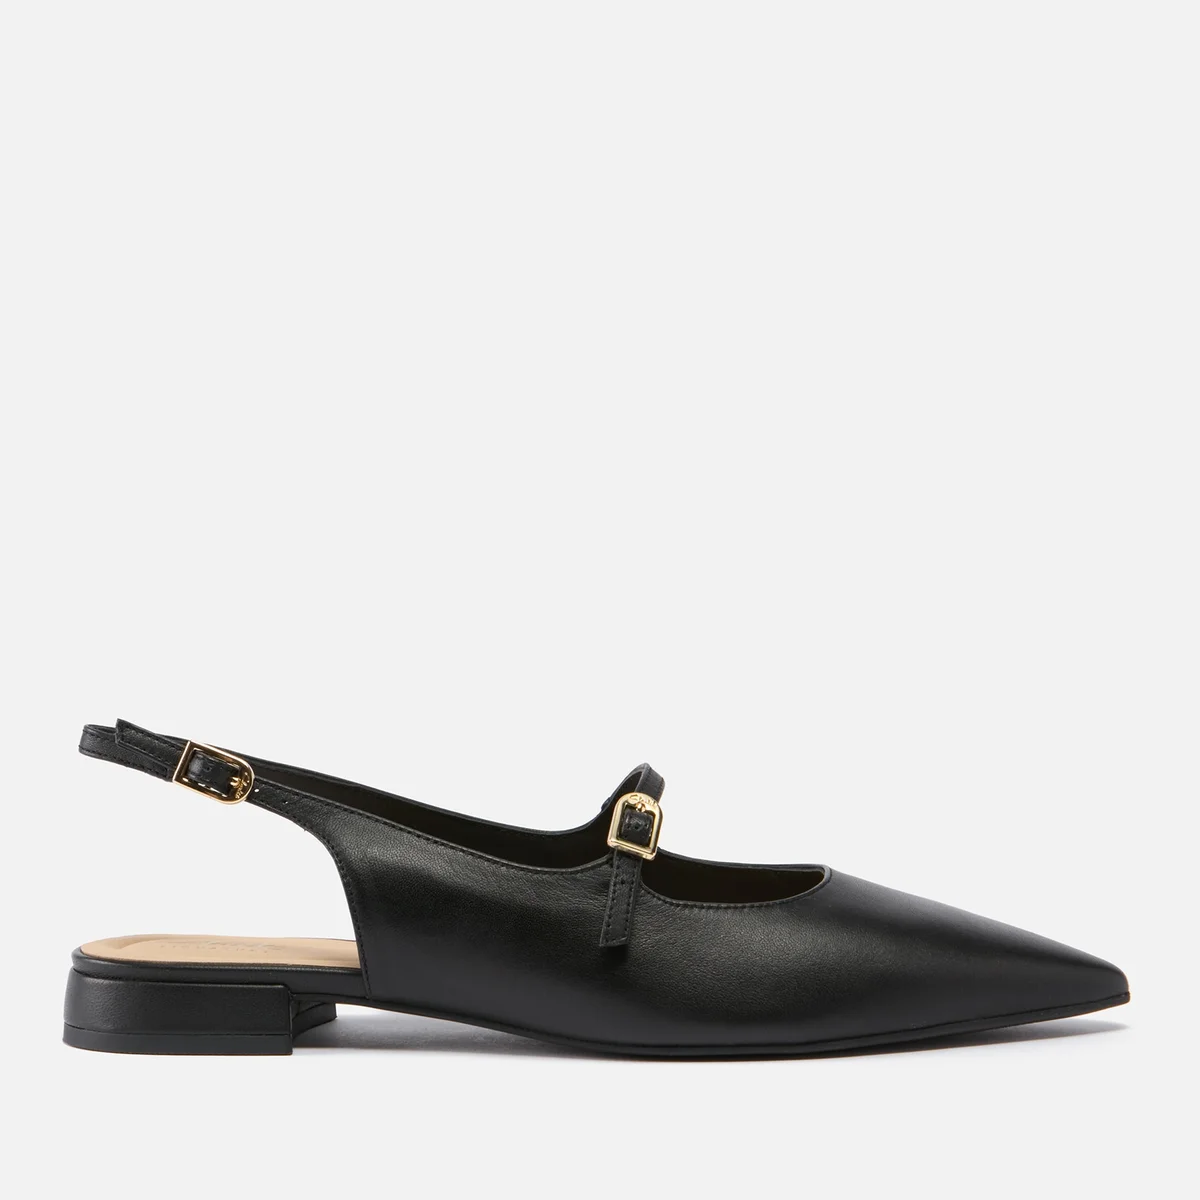 Clarks Women's Sensa15 Patent-Leather Pointed-Toe Flats Image 1